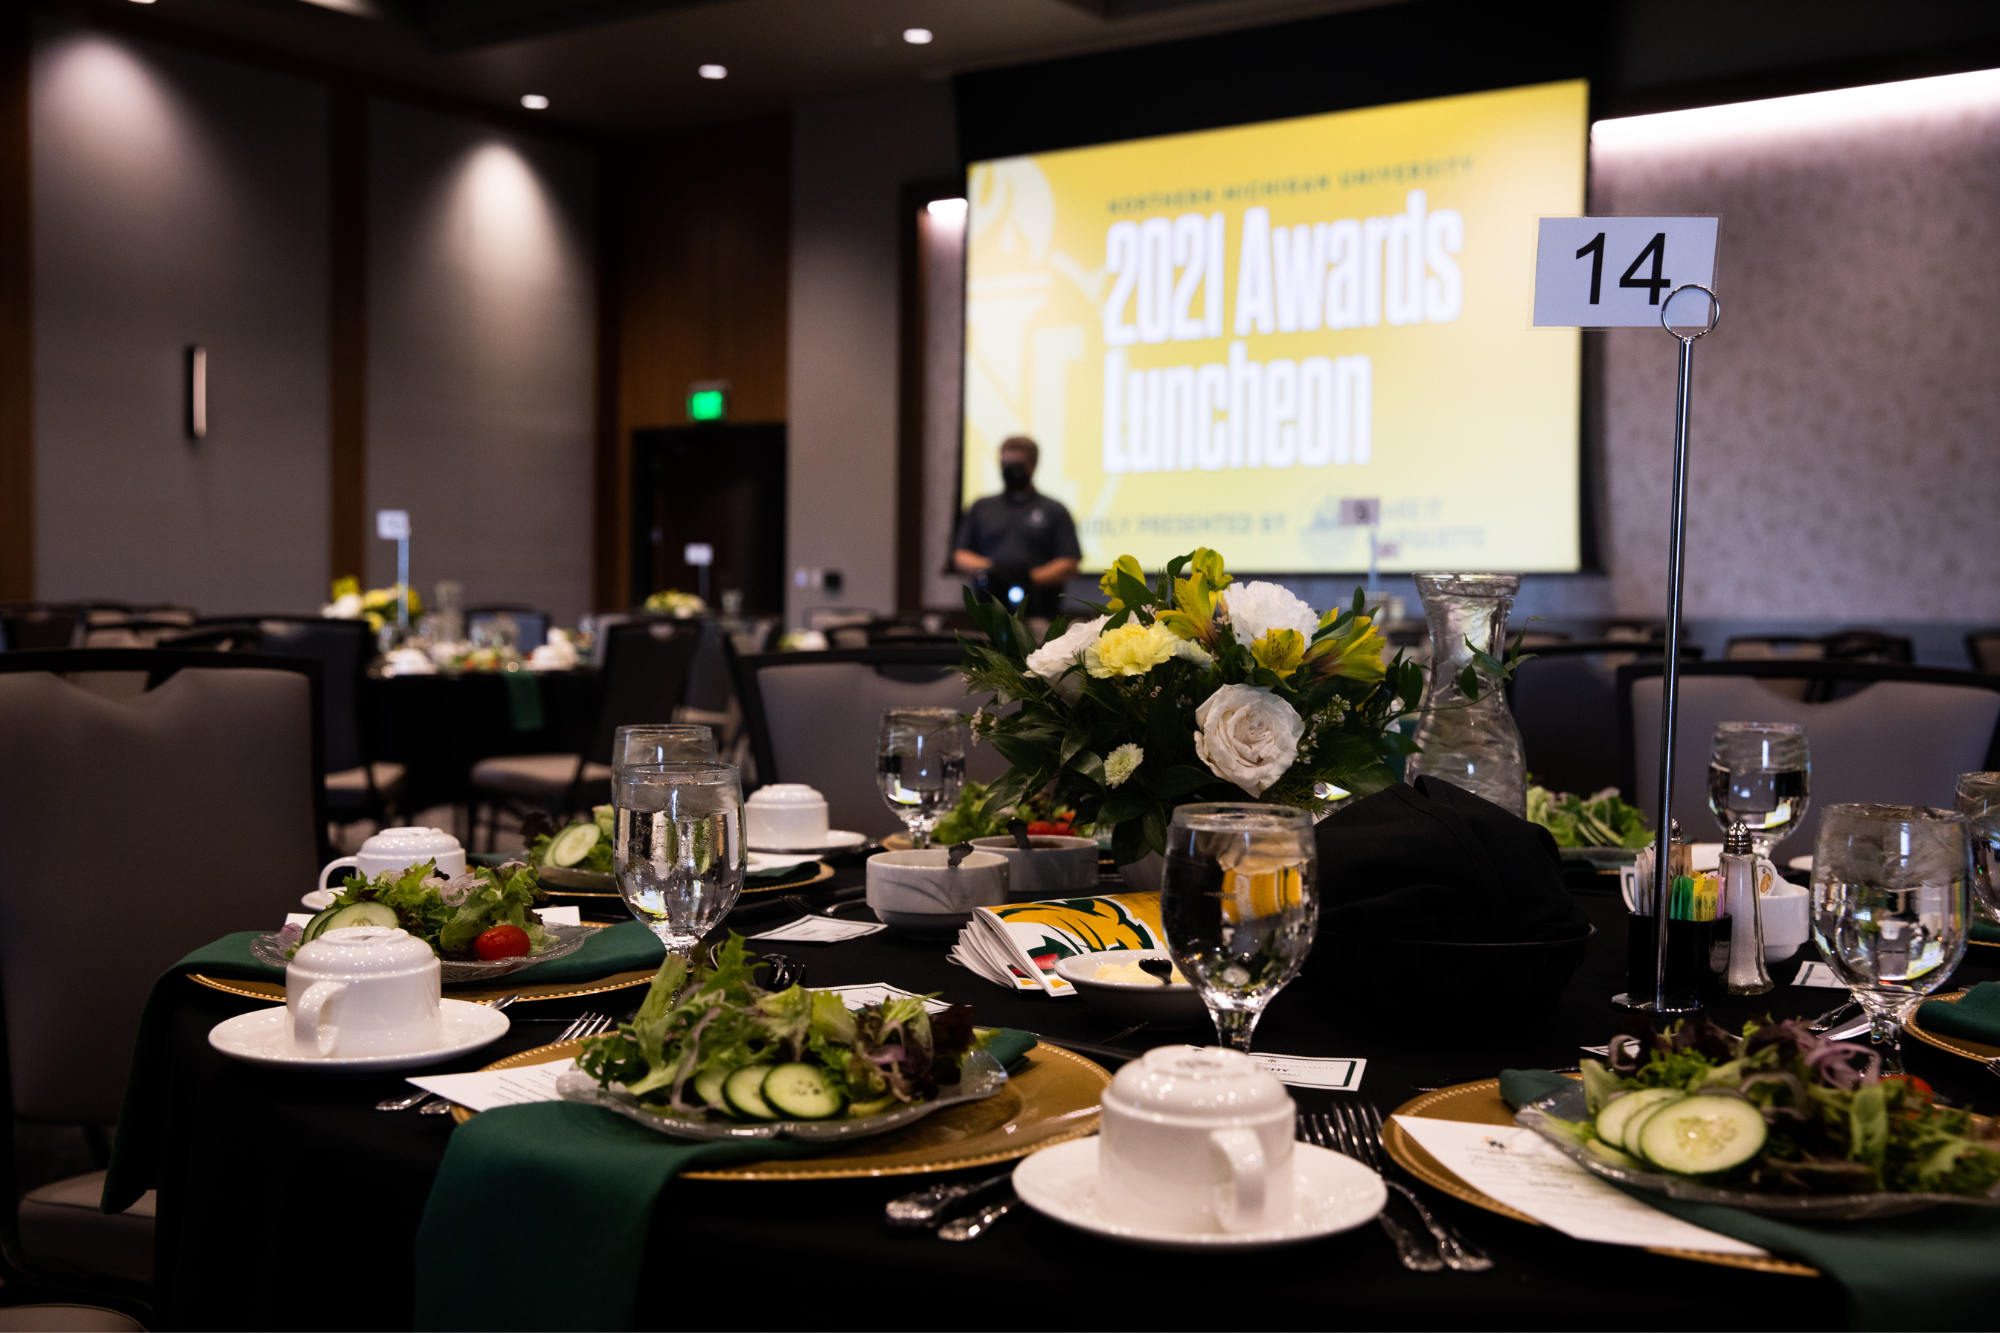 A table set for dinner with a presentation in the back reading "Alumni Awards Luncheon 2021"